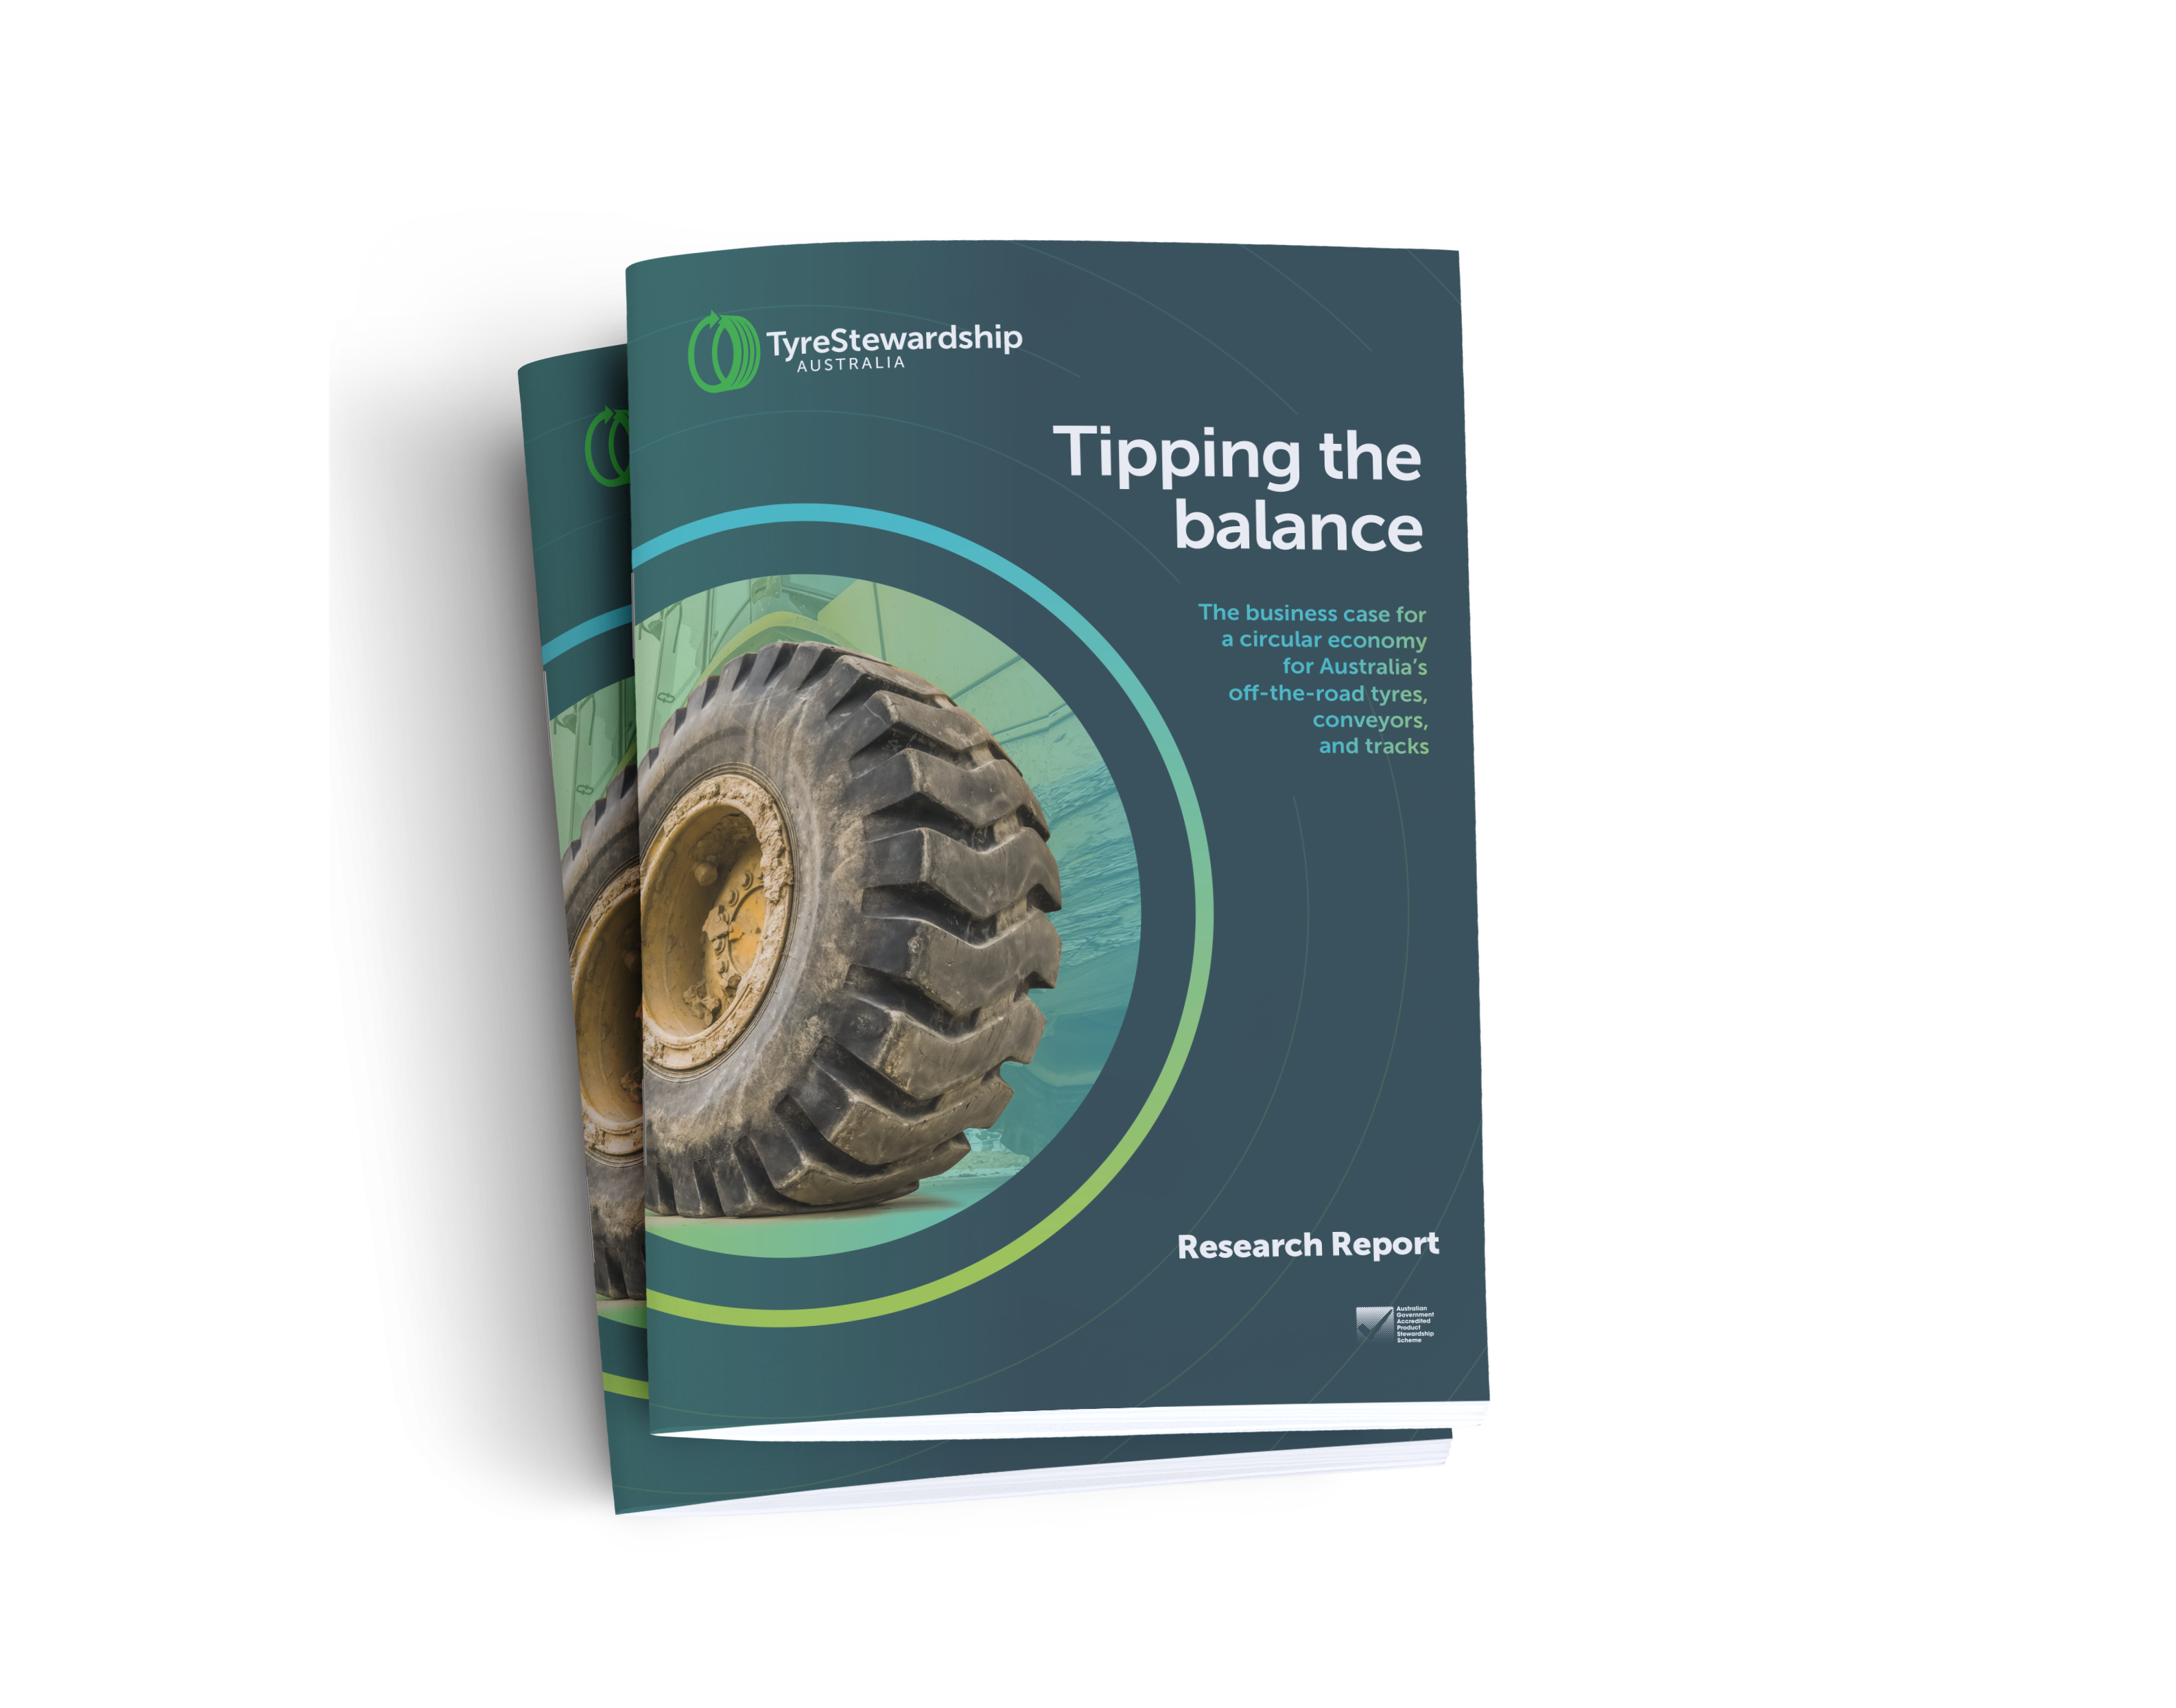 Announcement: TSA publishes its research report into off-the-road tyres, conveyors, and tracks